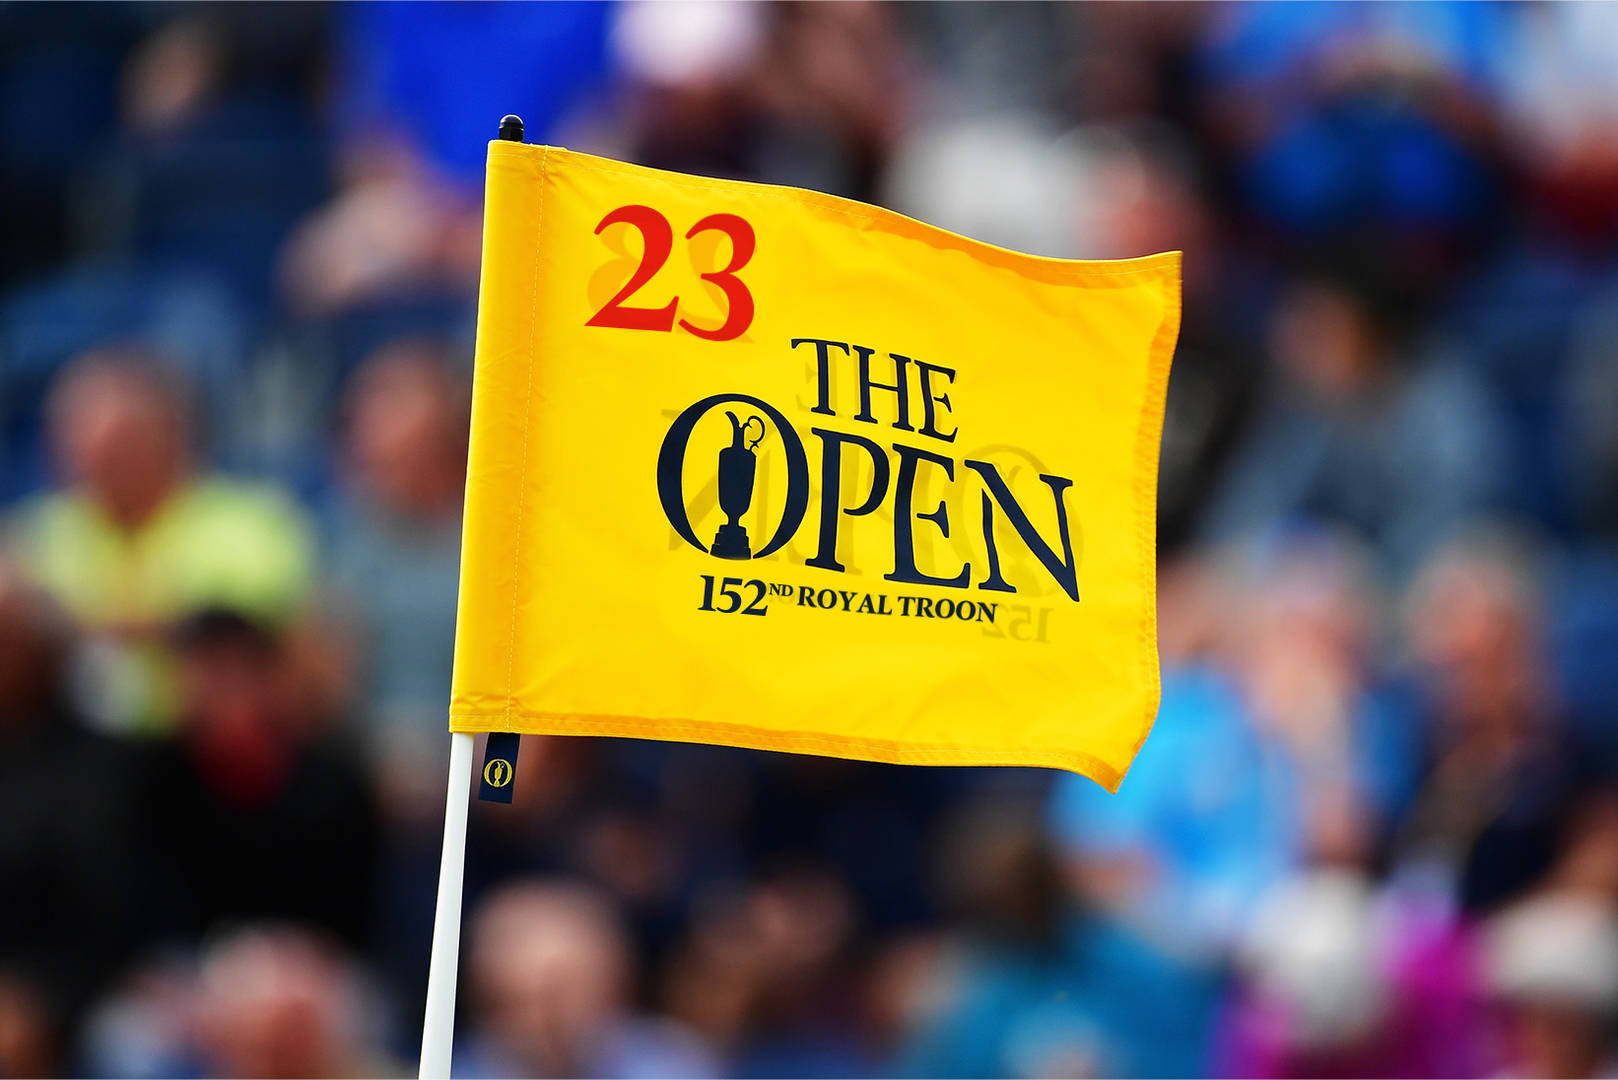 The 152nd Open  Royal Troon will host The Open in 2023